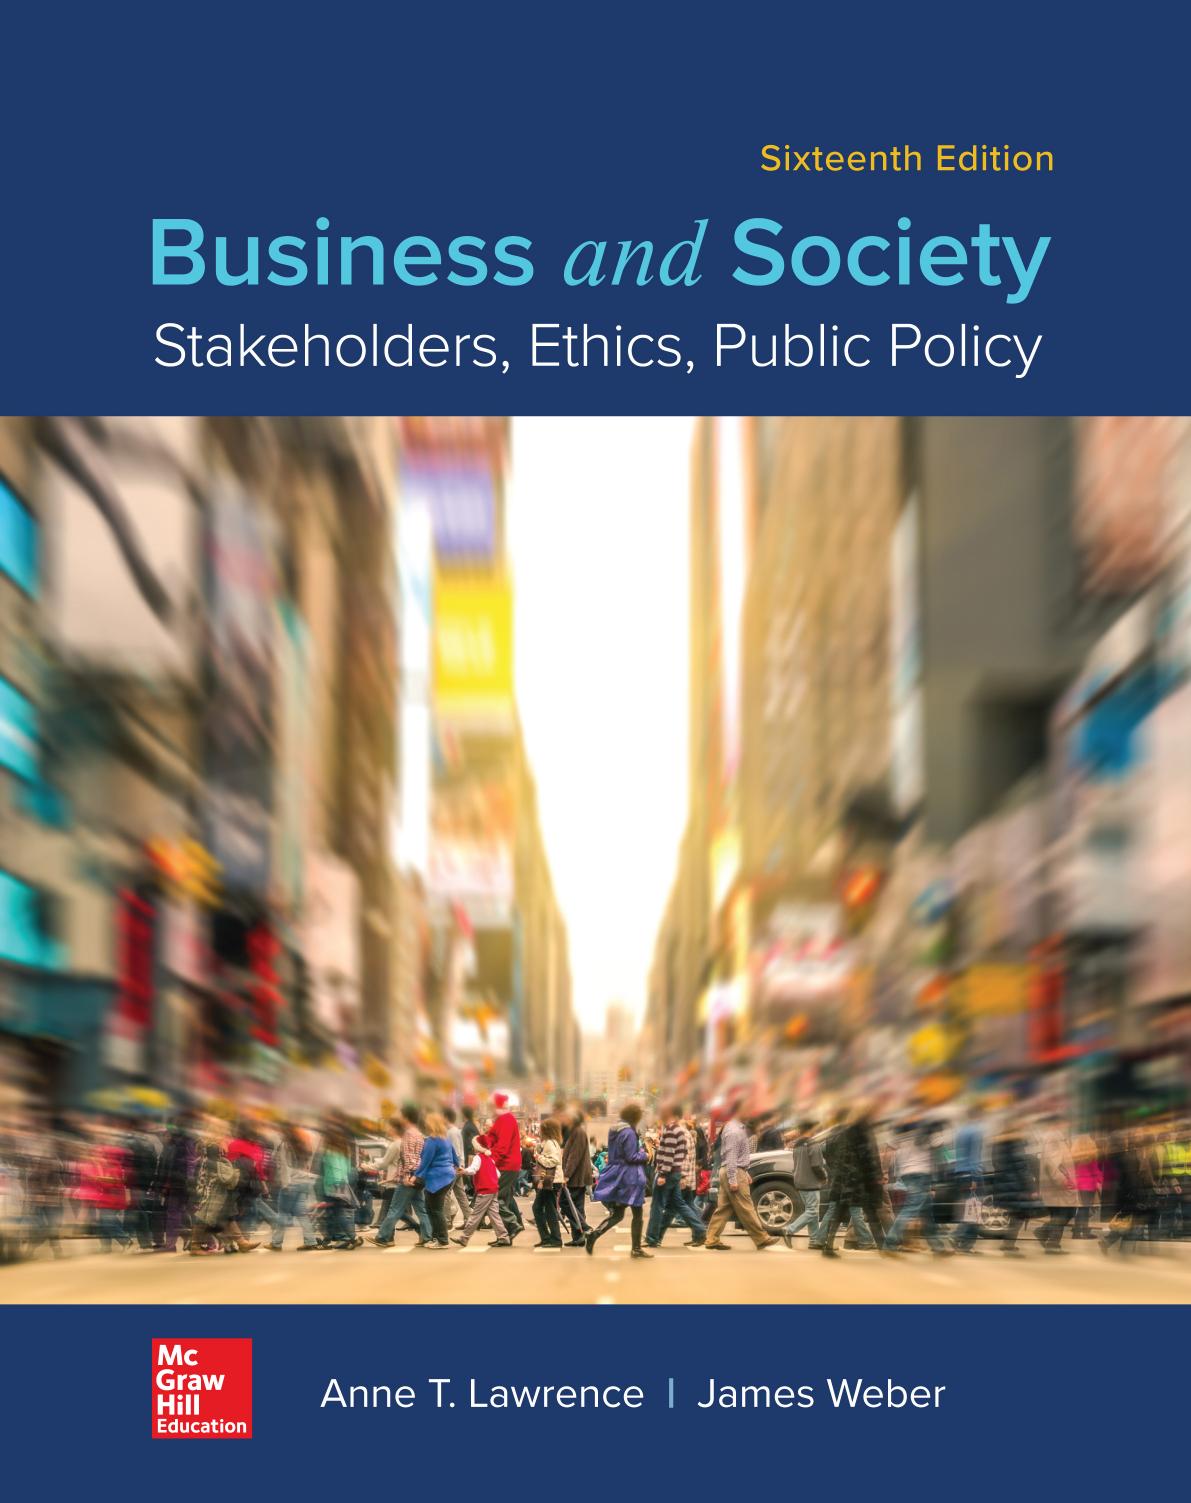 Business and society  stakeholders, ethics, public policy by Anne T. Lawrence (Business ethics professor) James Weber (z-lib.org) 16th ed 2020